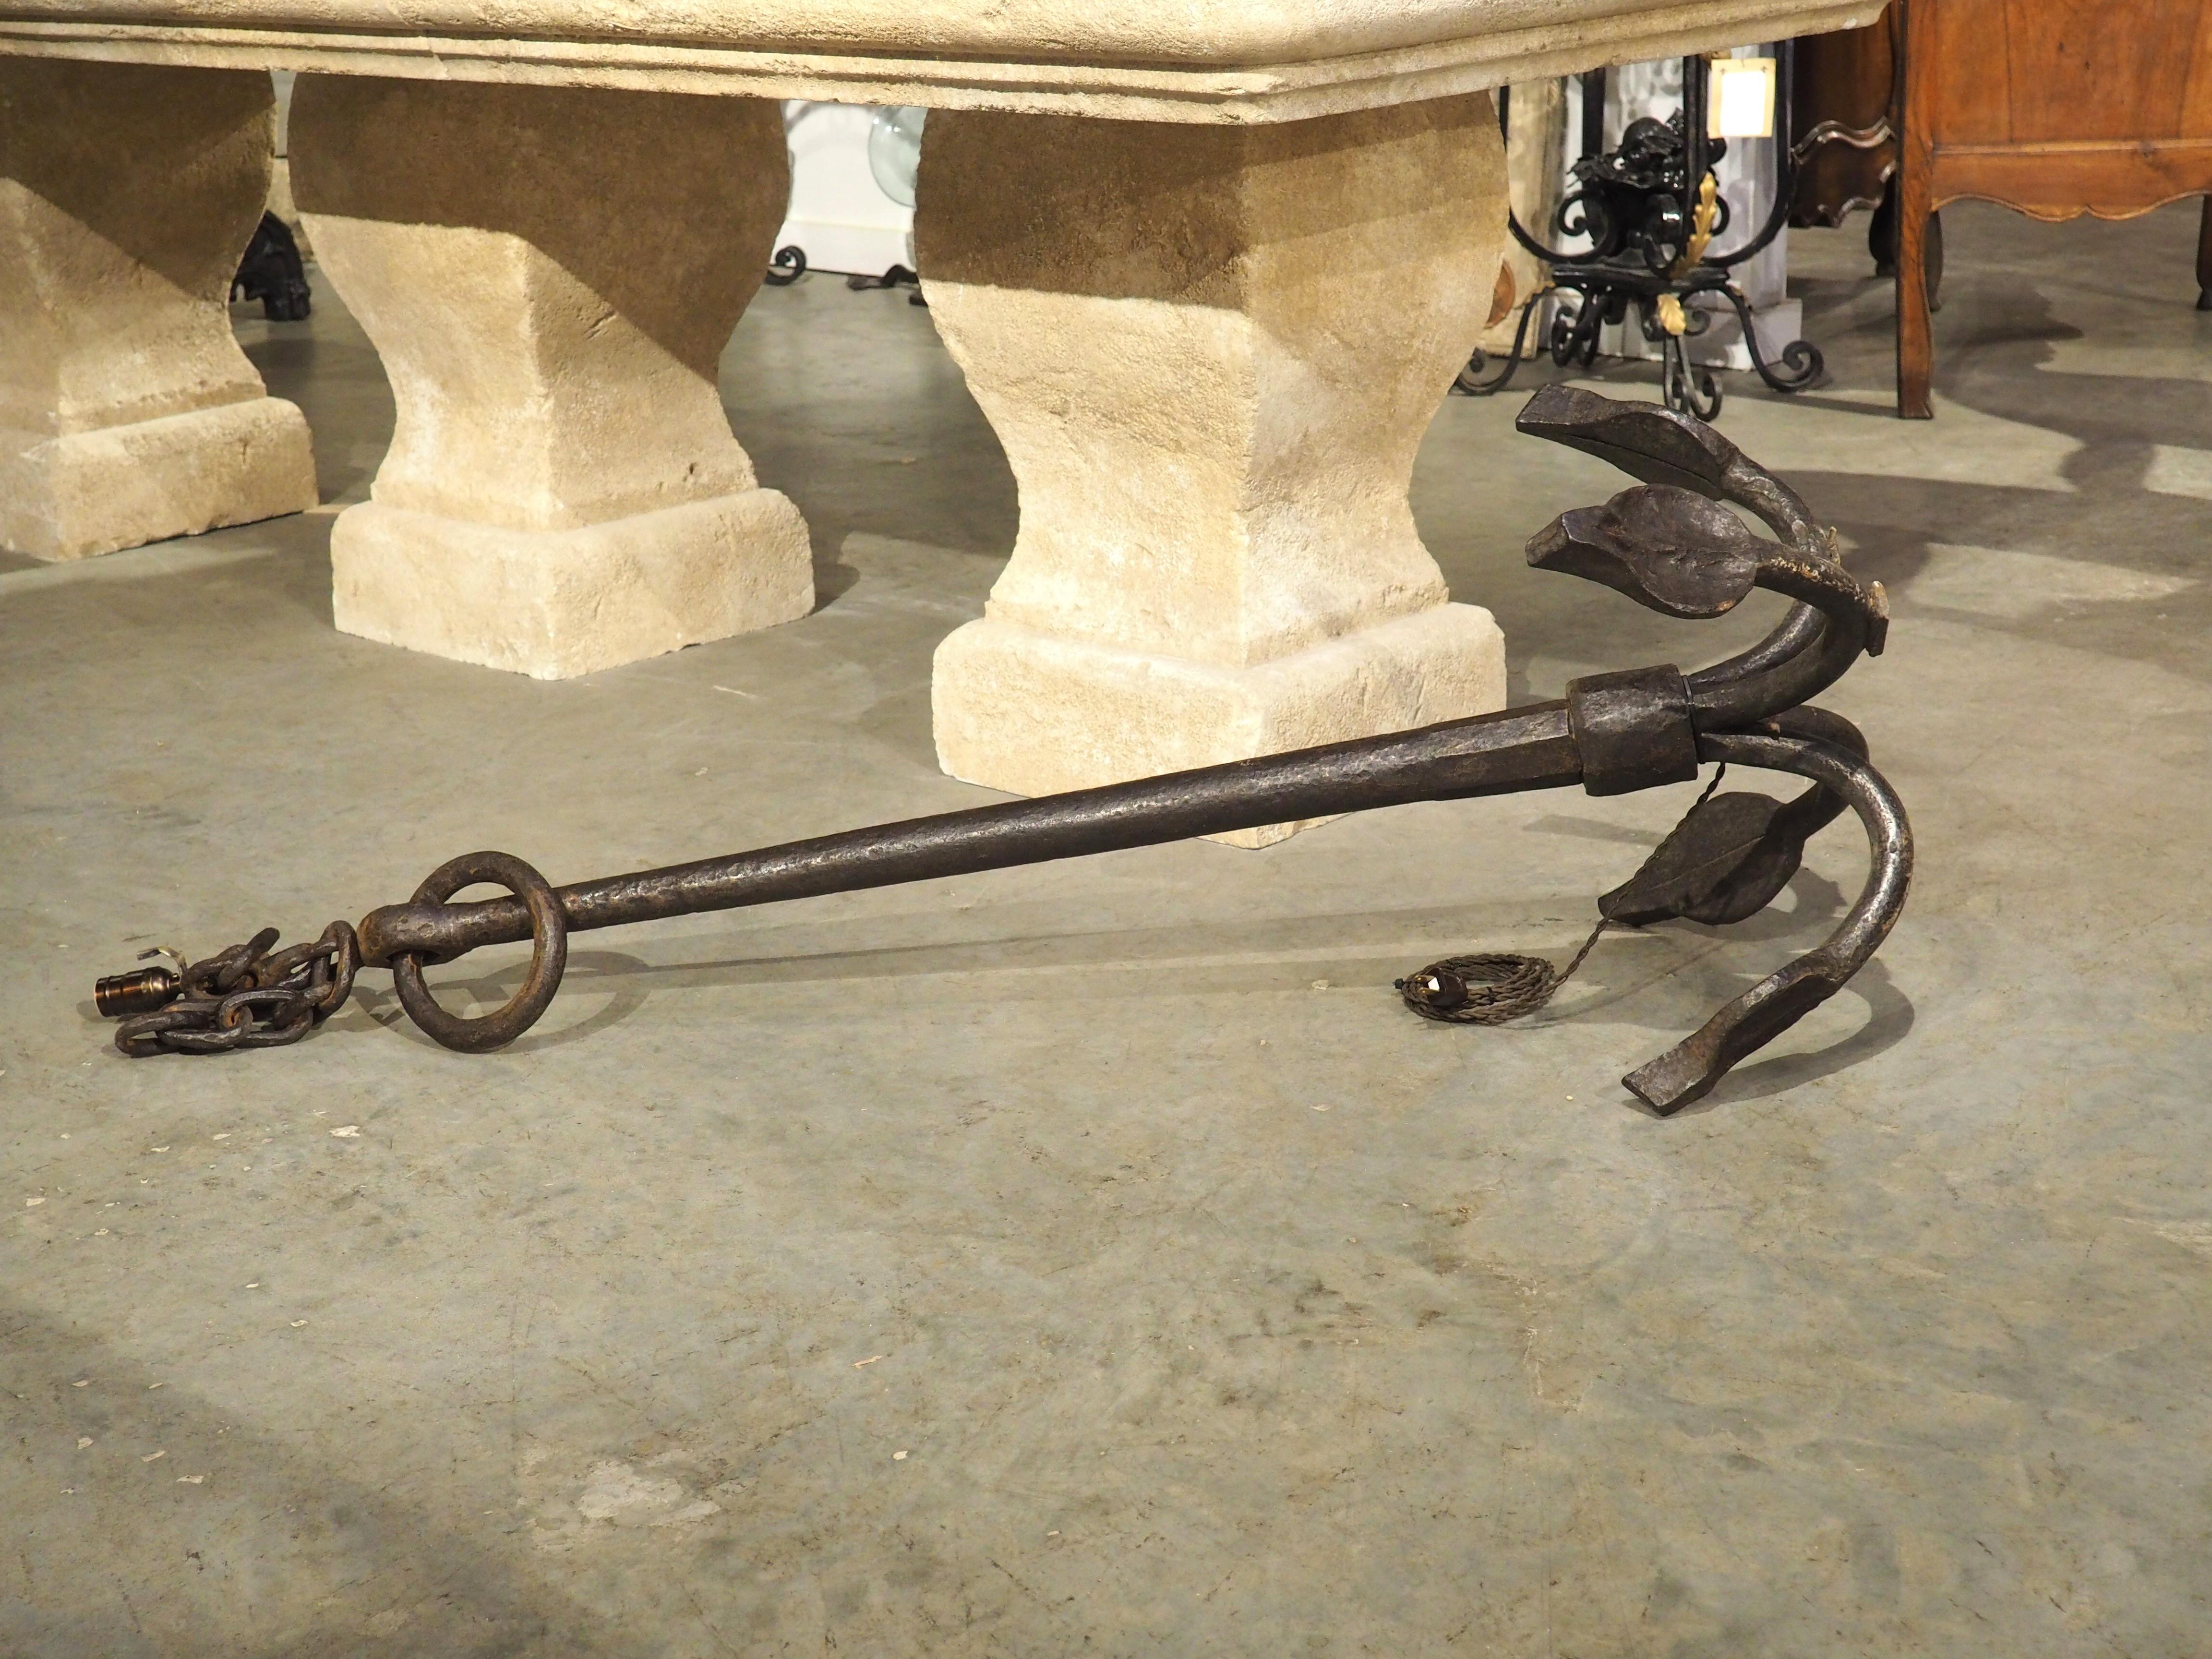 A unique source of illumination, this large wrought iron boat anchor has been fitted with a lamp socket and harp. Originally from France (1800s), the stockless grapnel style anchor has a wonderful light patination of oxidation from exposure to the